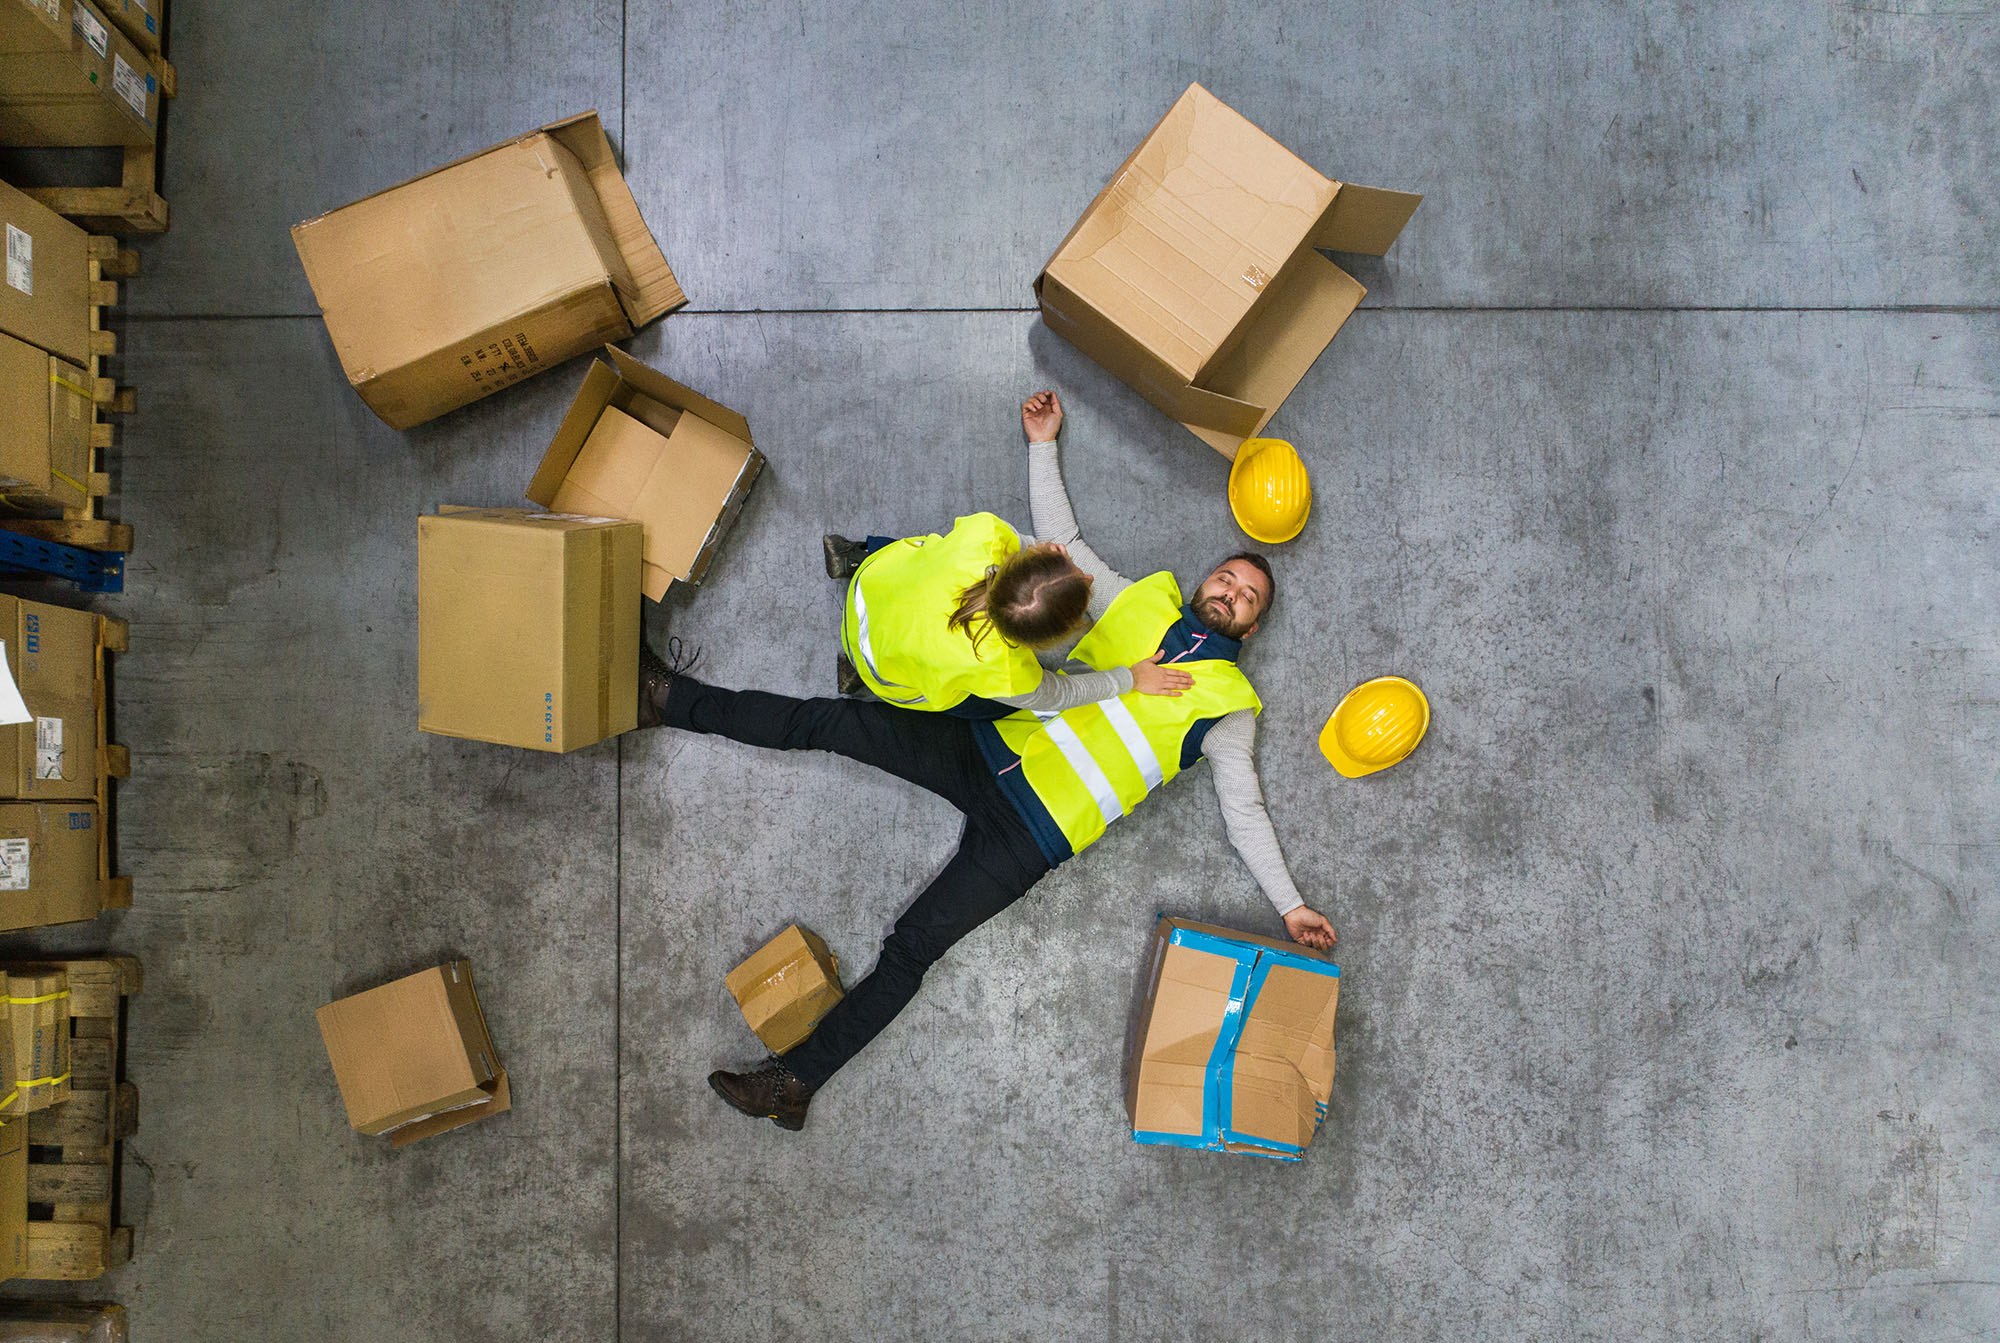 Personal injury from being stuck by moving objects falling, flying or collapsing at work